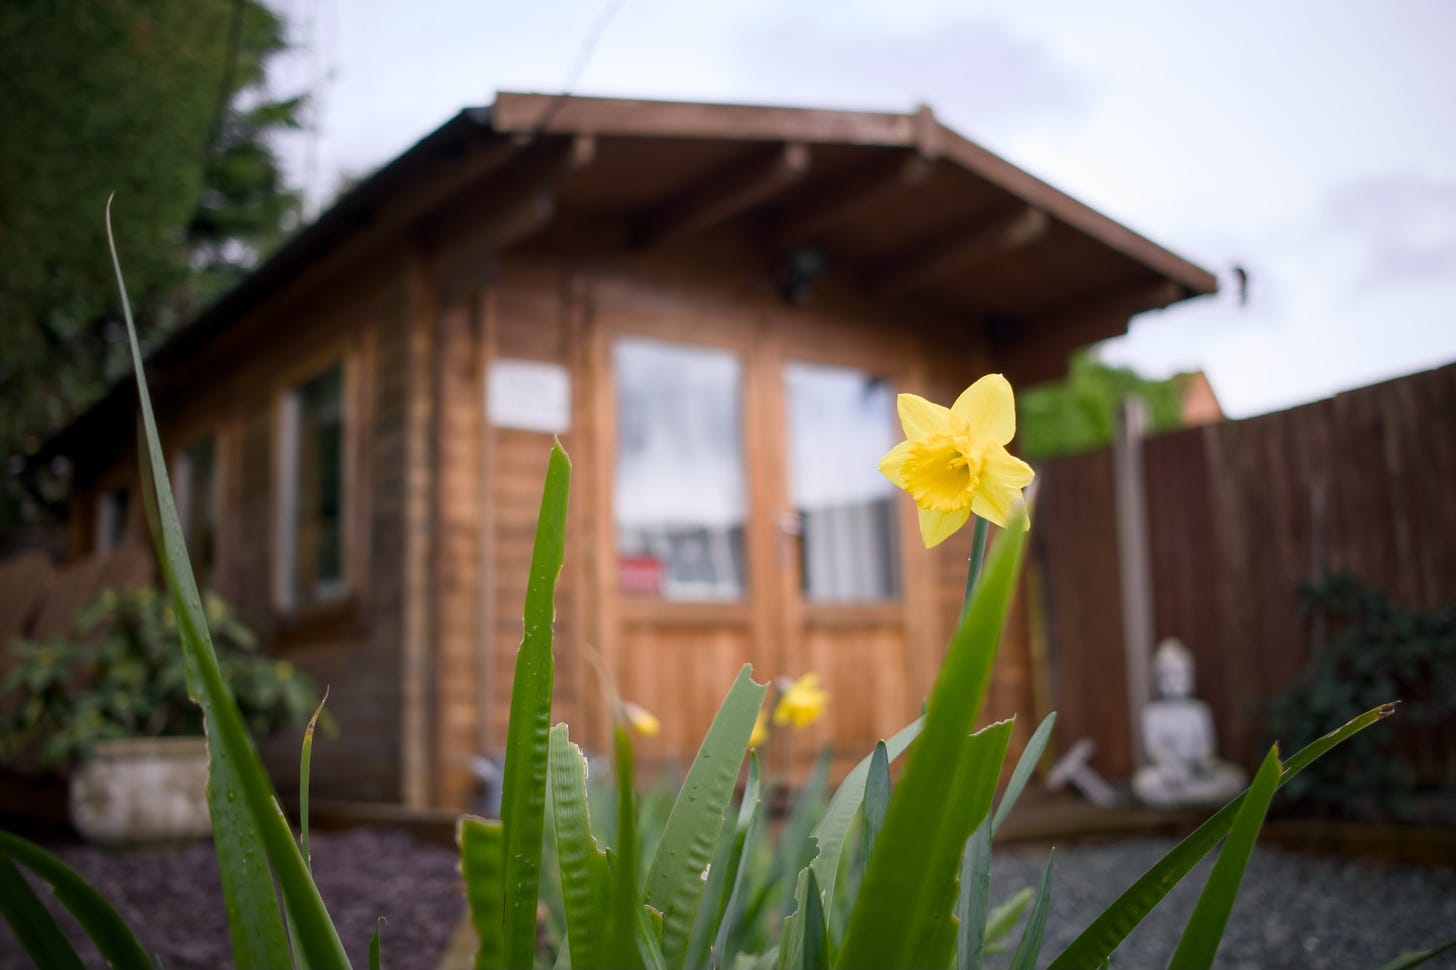 A shed sits out of focus behind a row of daffodils.